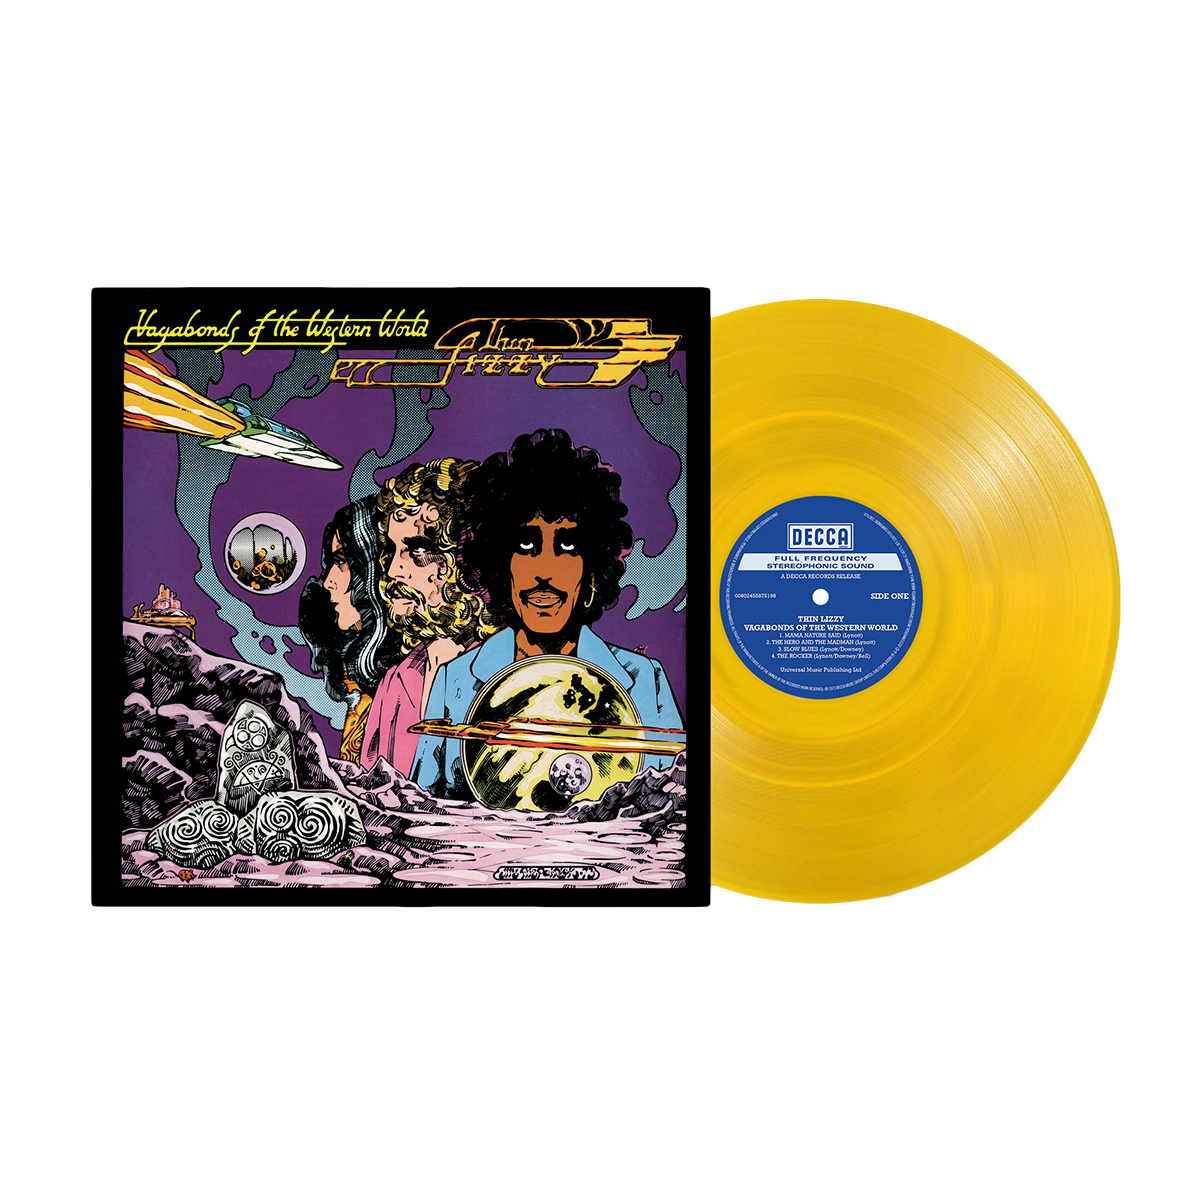 Vagabonds of the Western World: Limited Yellow Vinyl LP, Exclusive Artcard (Signed by Eric Bell) + Jim Fitzpatrick Poster Set